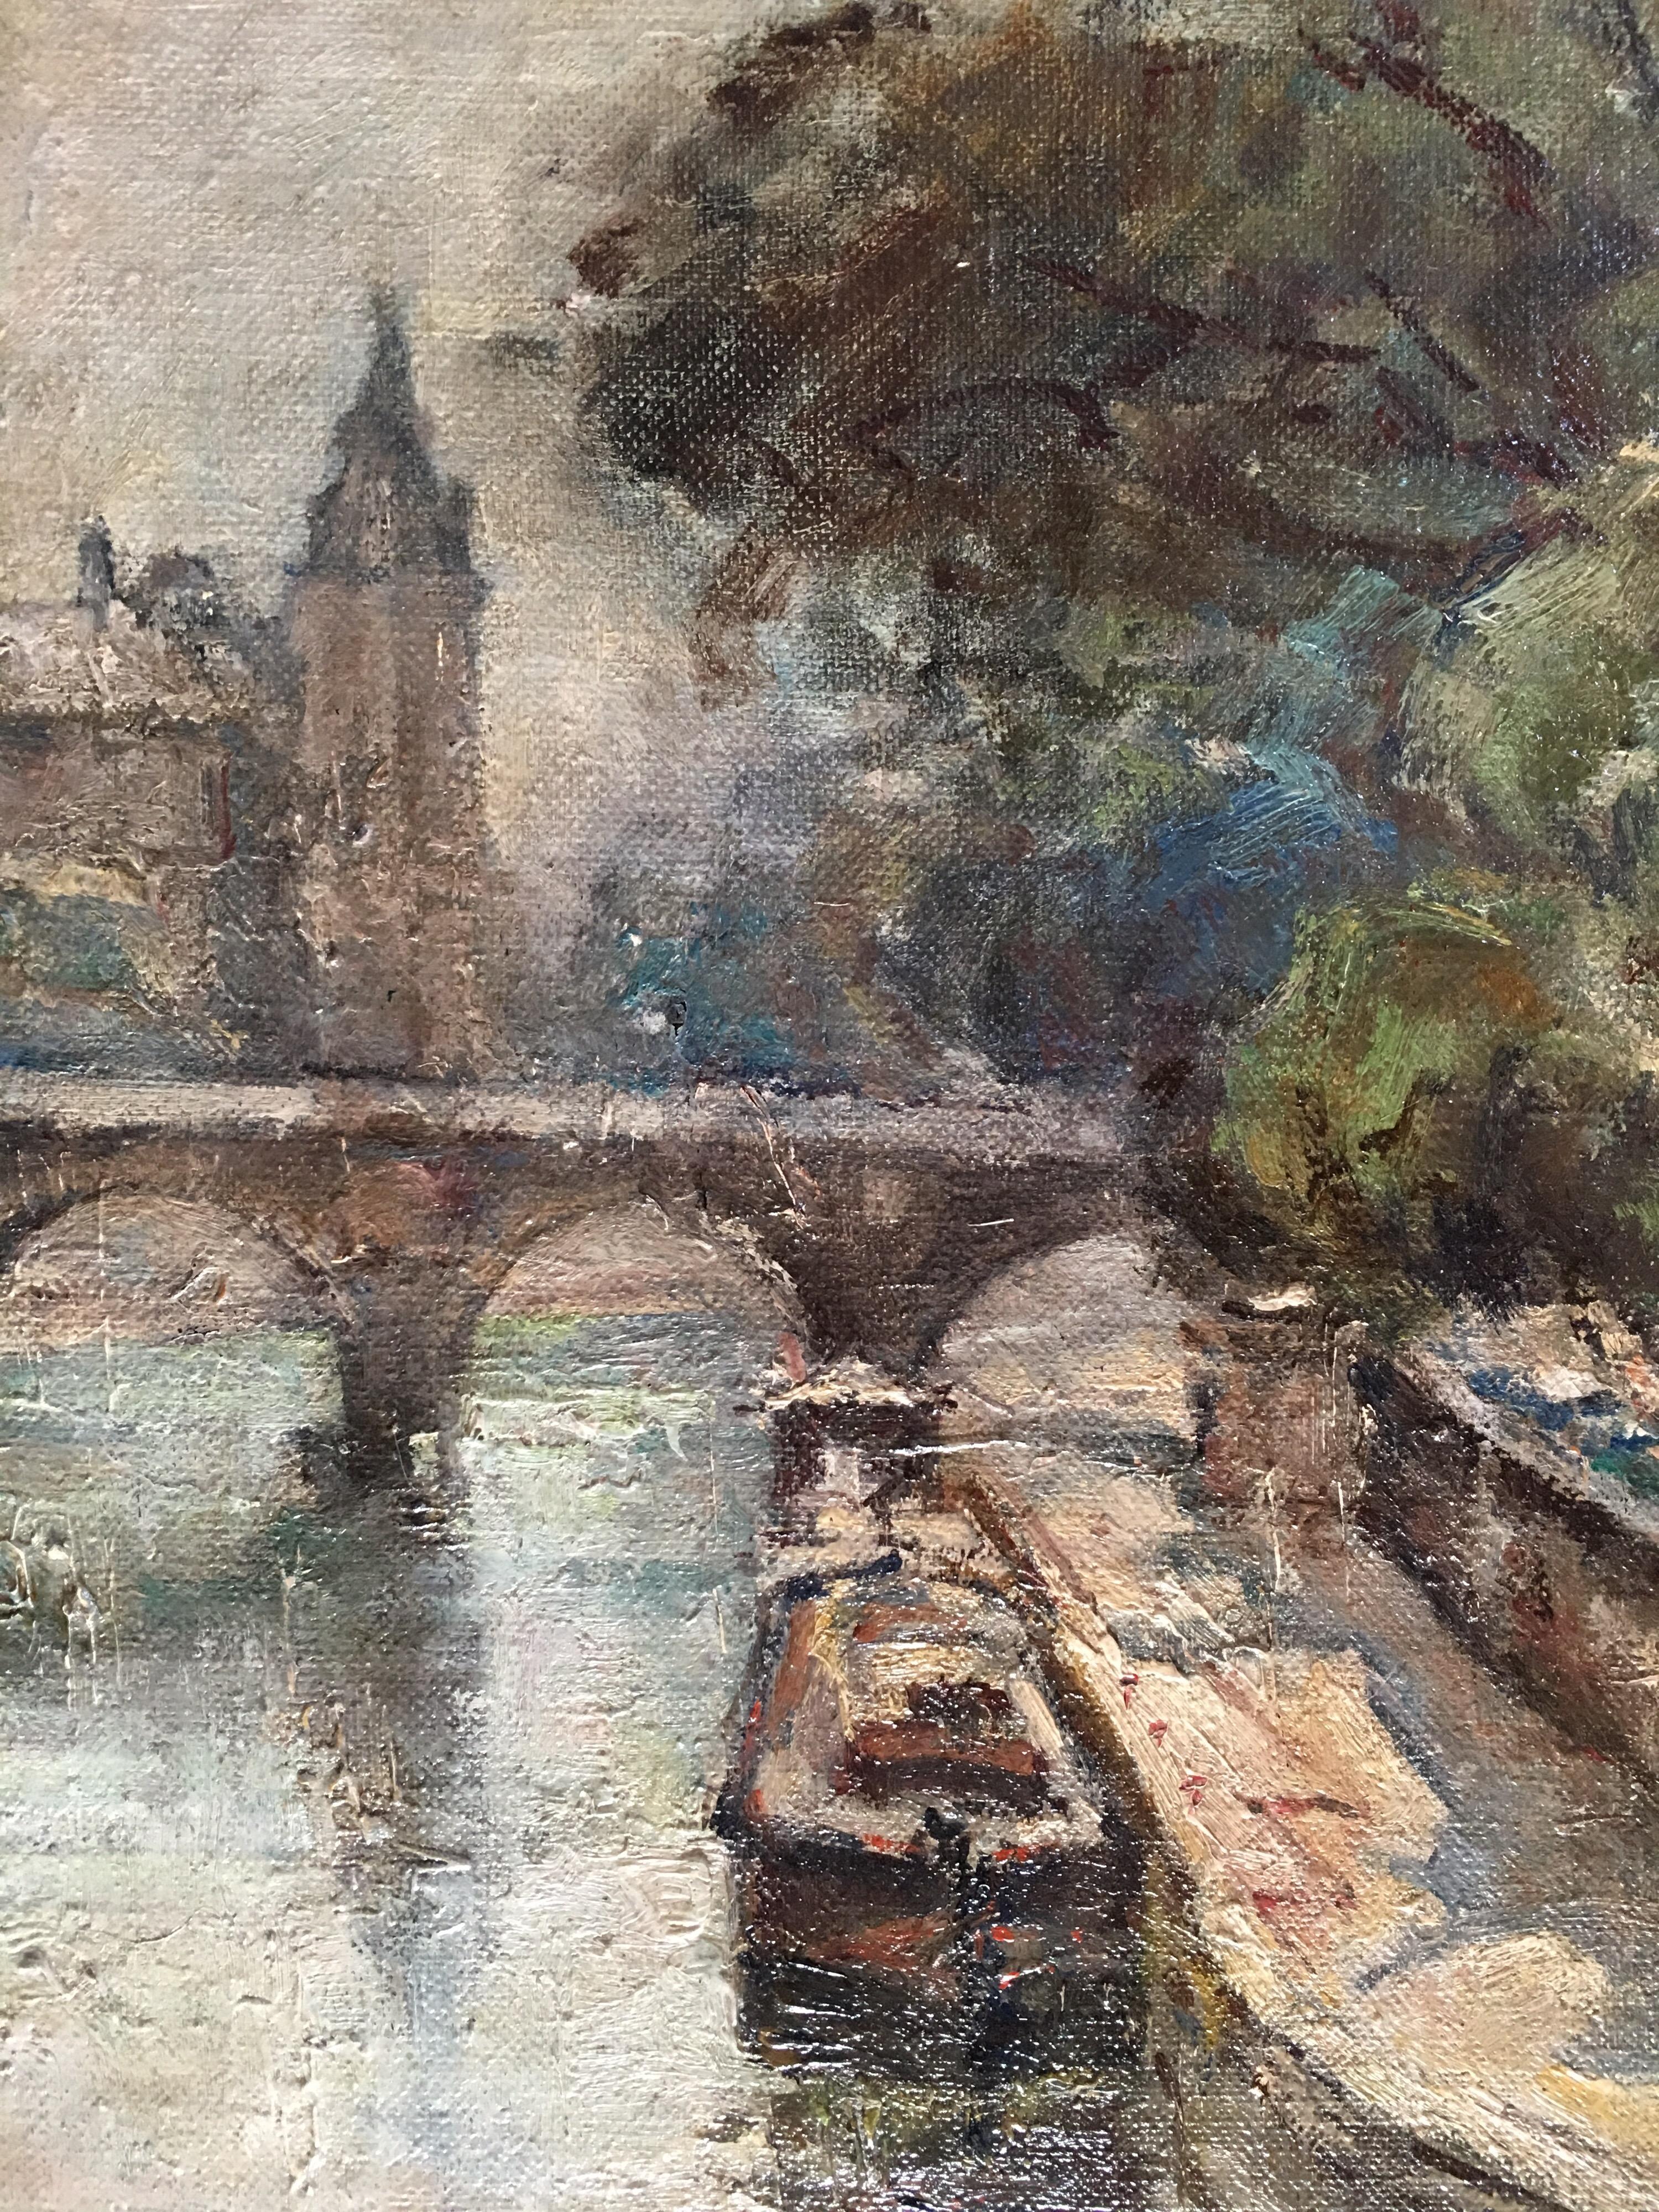 Pont Neuf, Paris, Impressionist Landscape, Signed Oil Painting
By French artist, Mid 20th Century
Signed indistinctly by the artist on the lower left hand corner
Oil painting on canvas, framed
Framed size: 19 x 22 inches

Beautiful scene of the